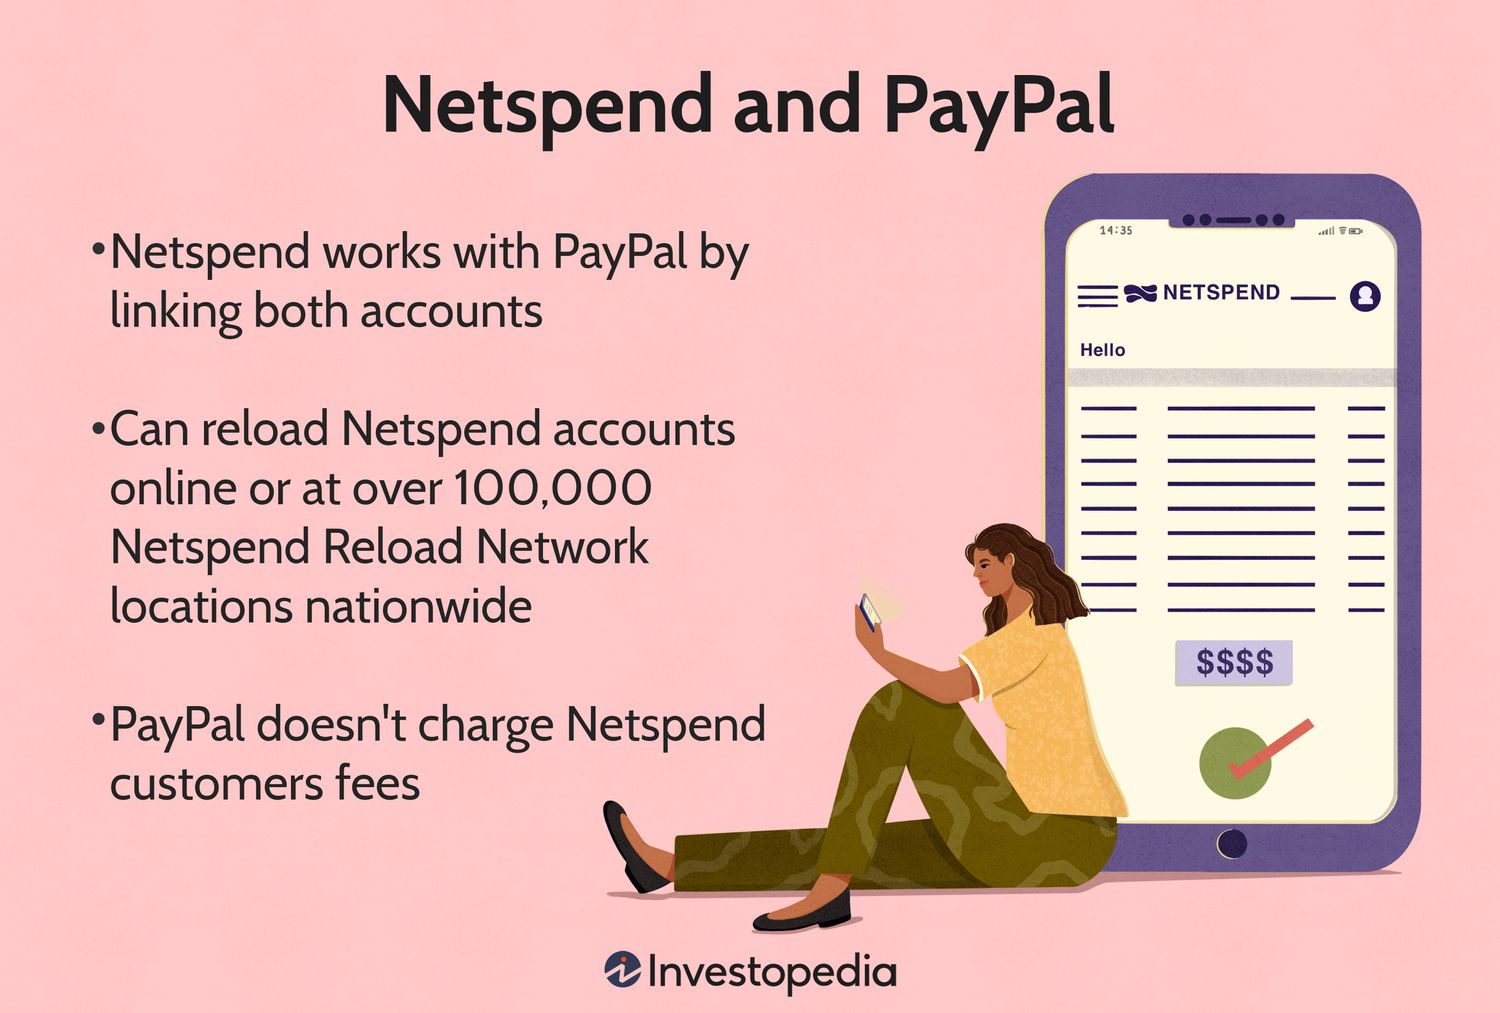 How to Transfer Money from Netspend to Paypal